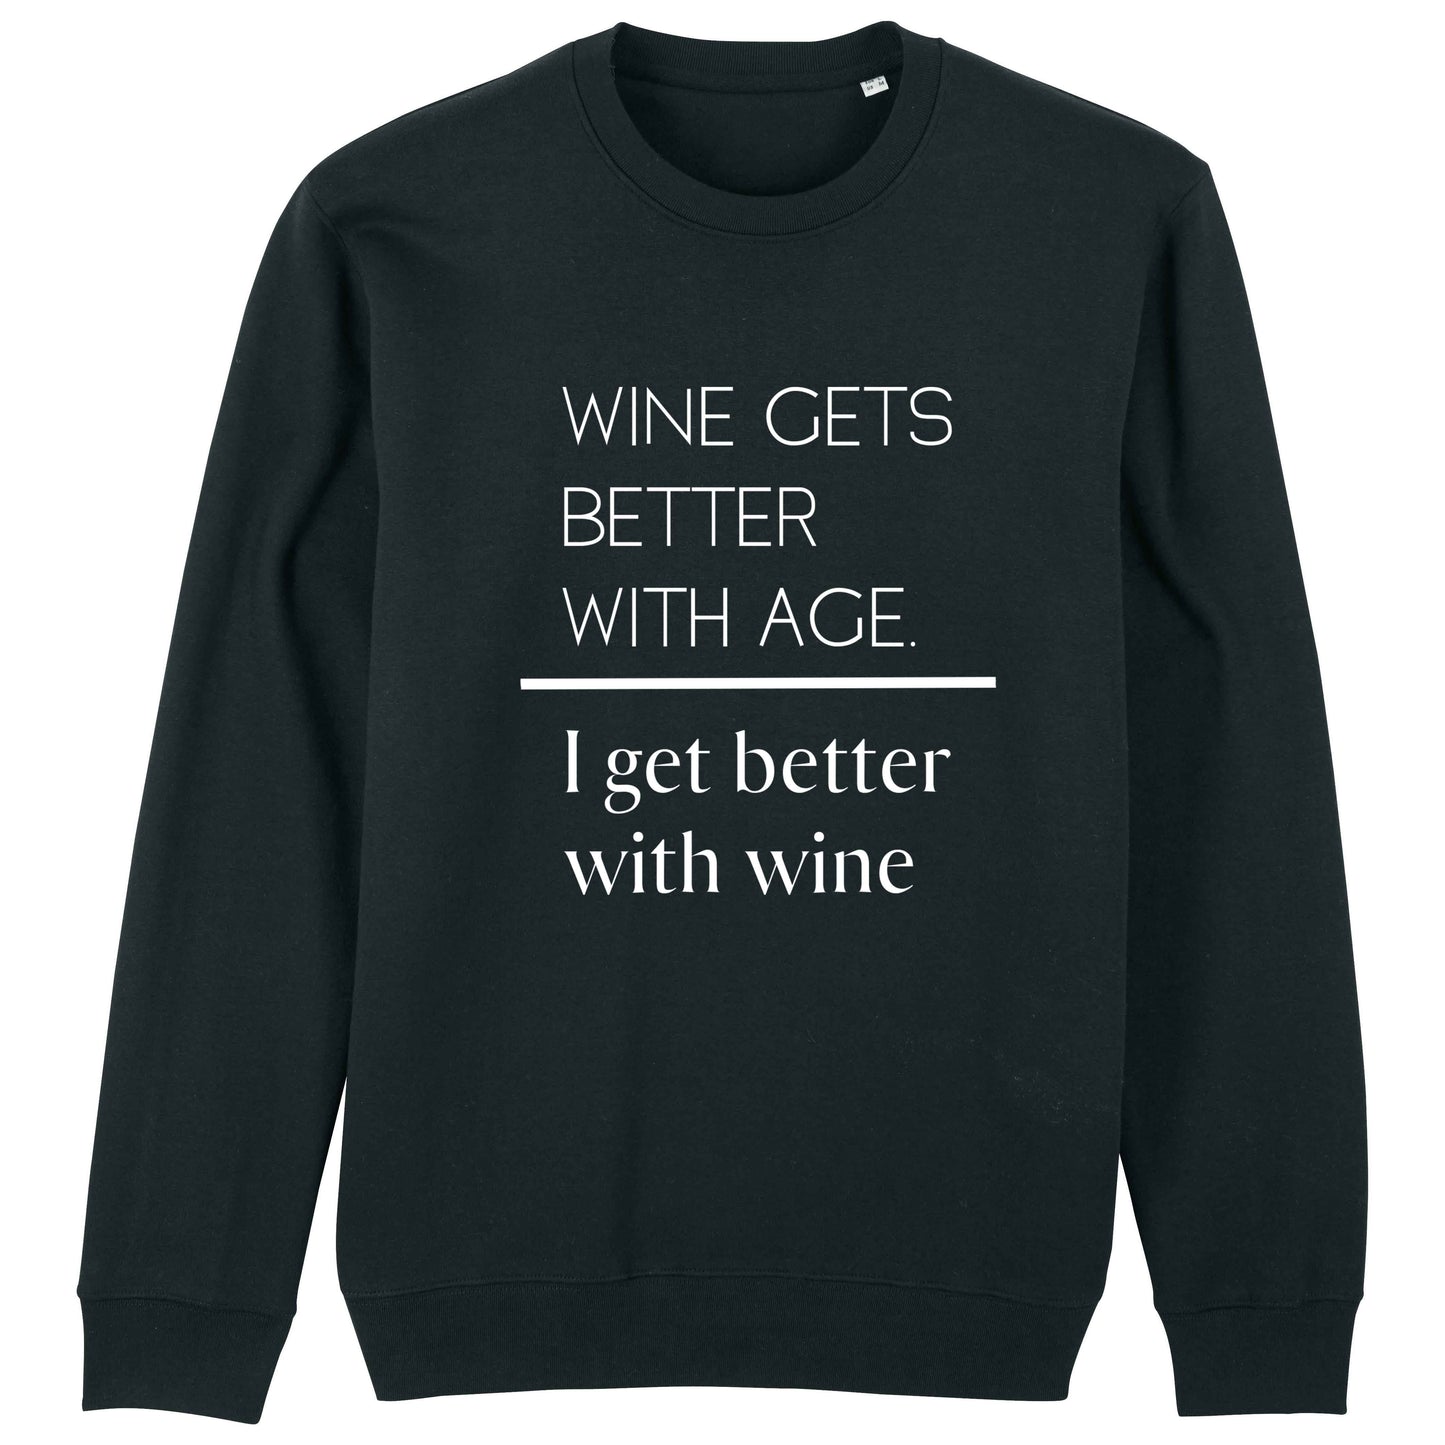 Wine gets better with age - Organic Unisex Sweater